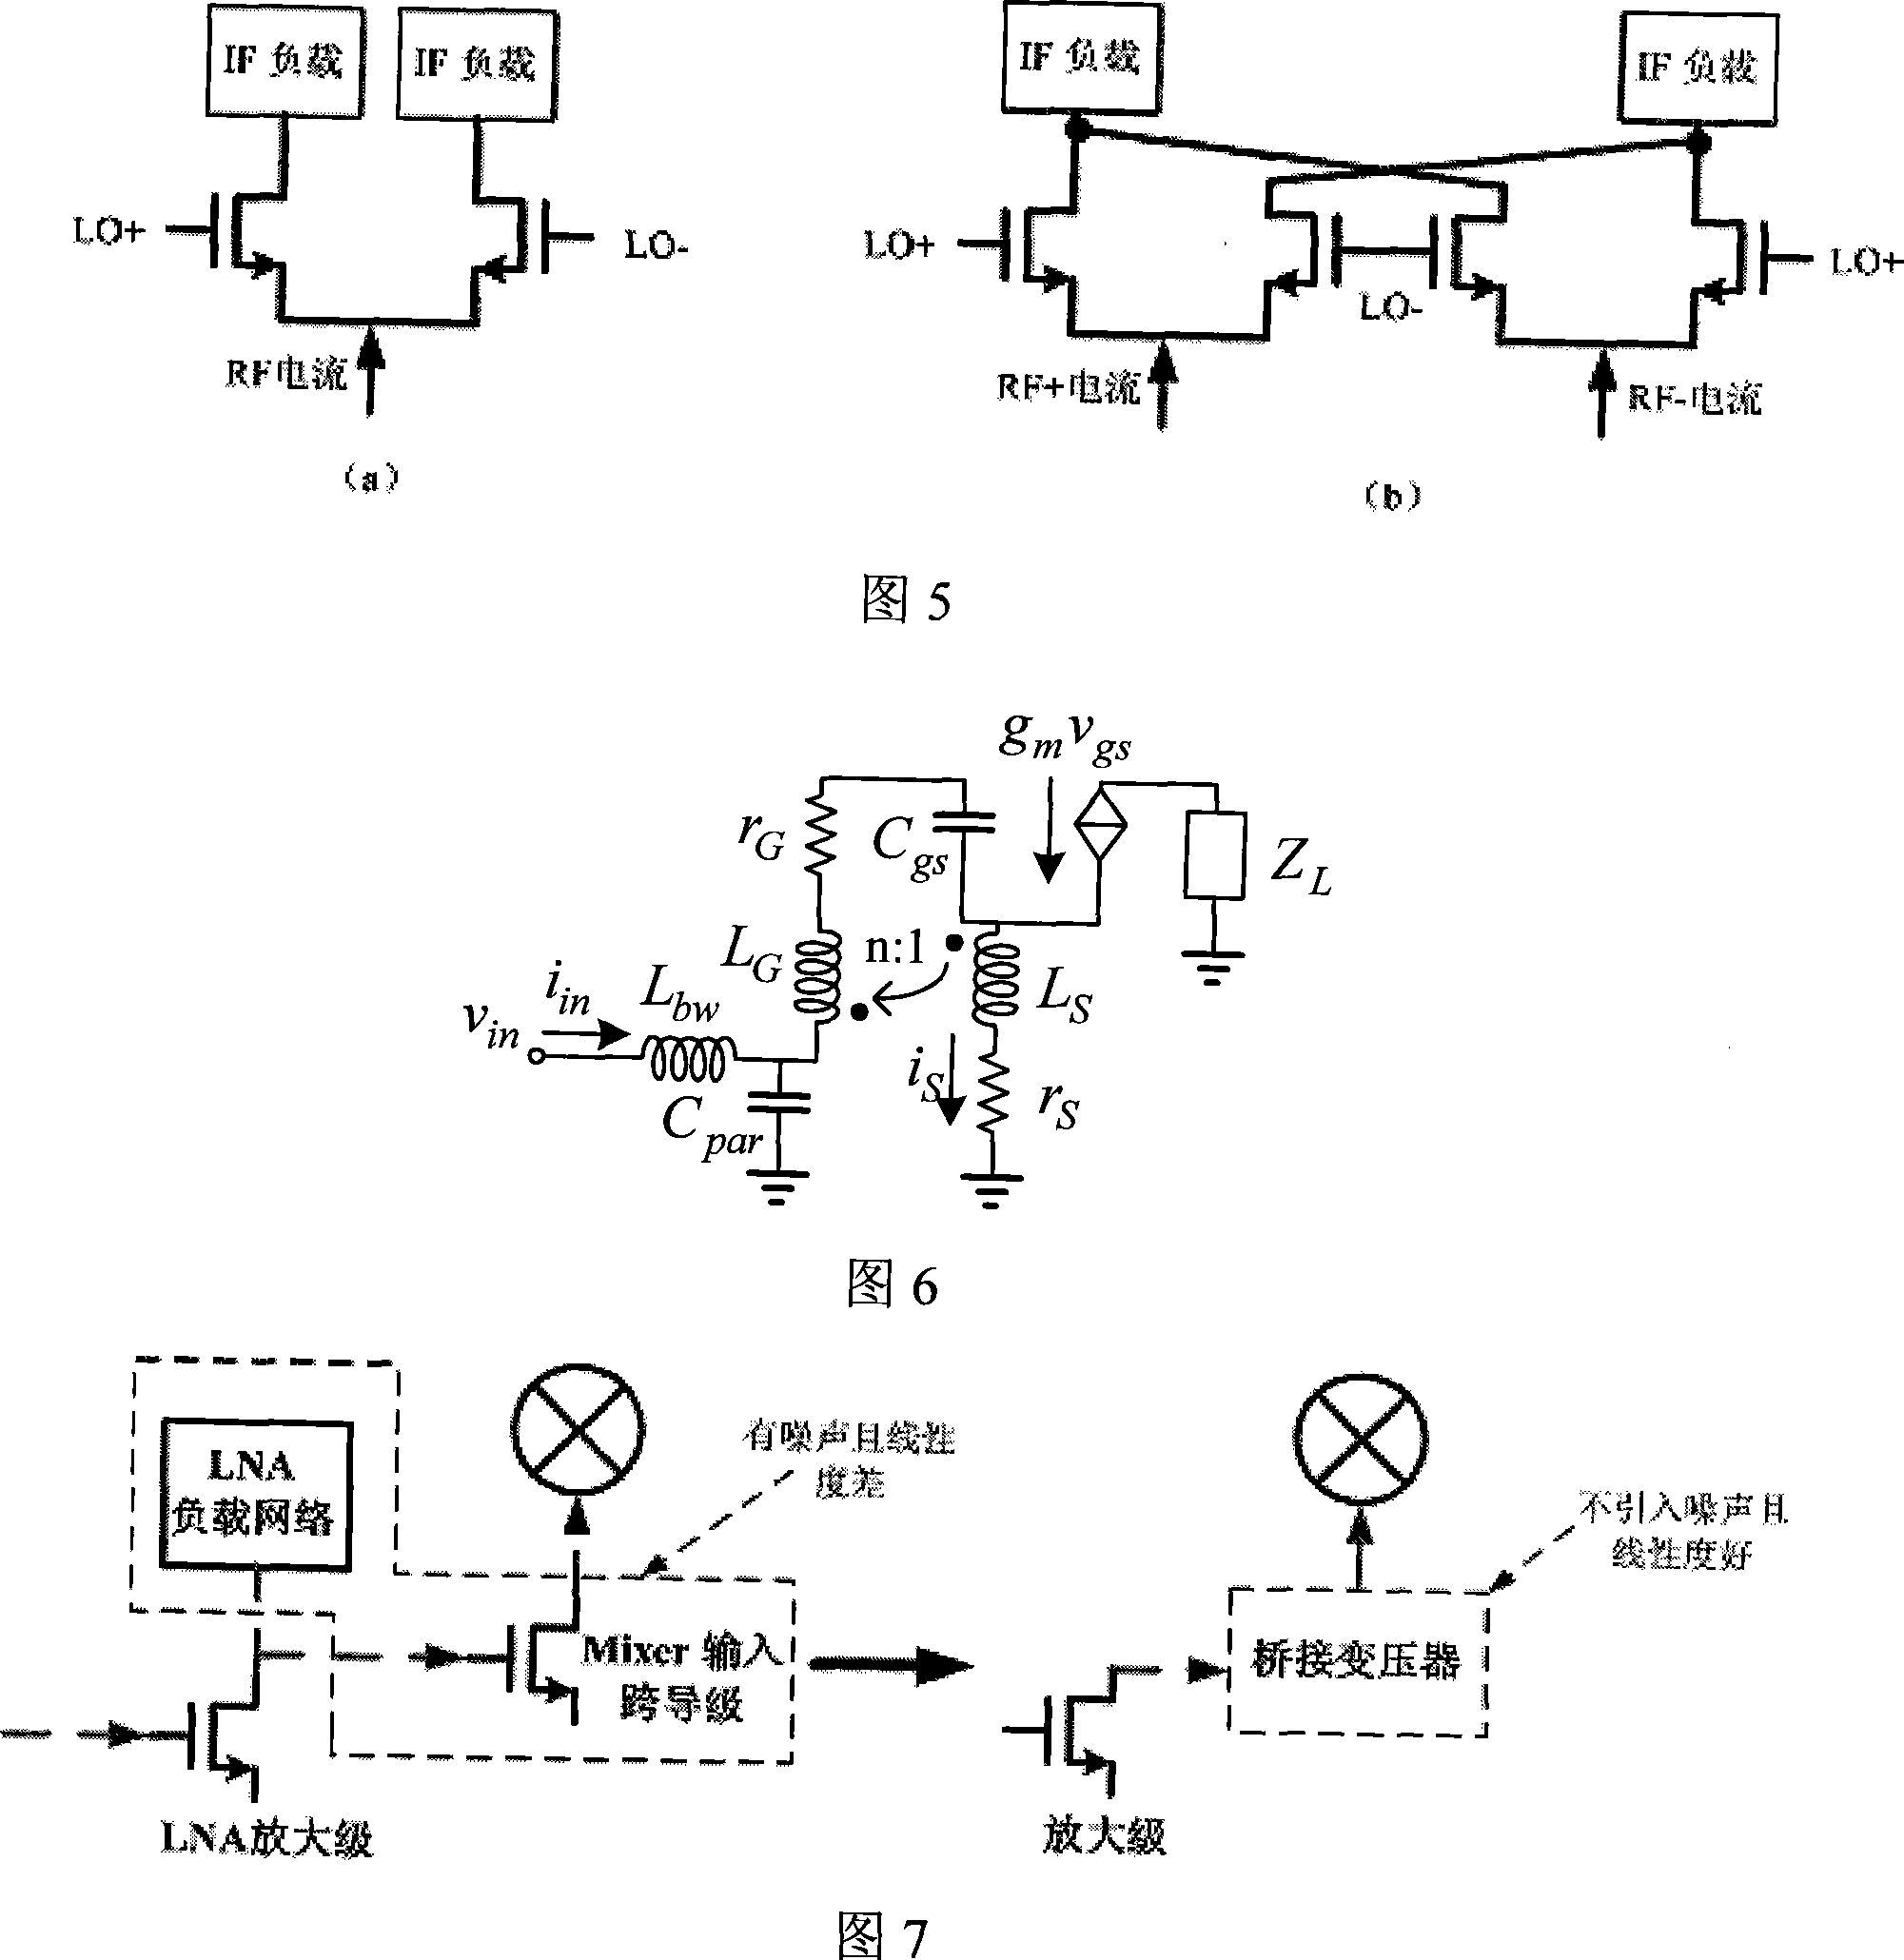 Low-power consumption wireless receiver radio frequency front end circuit